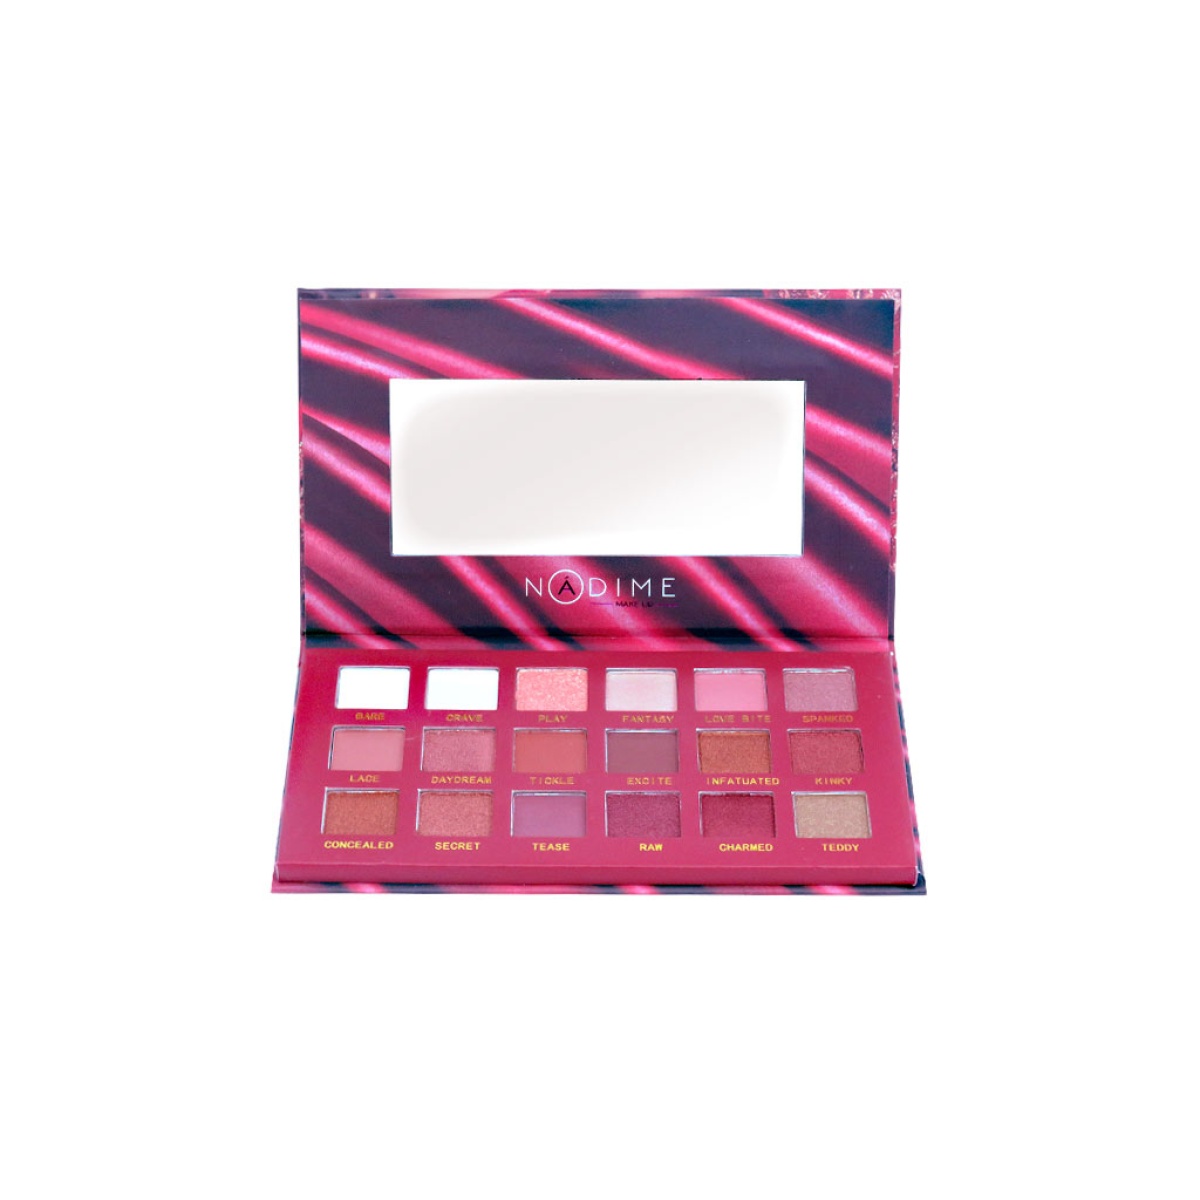 Nádime 18 color eyeshadow palette BYY002